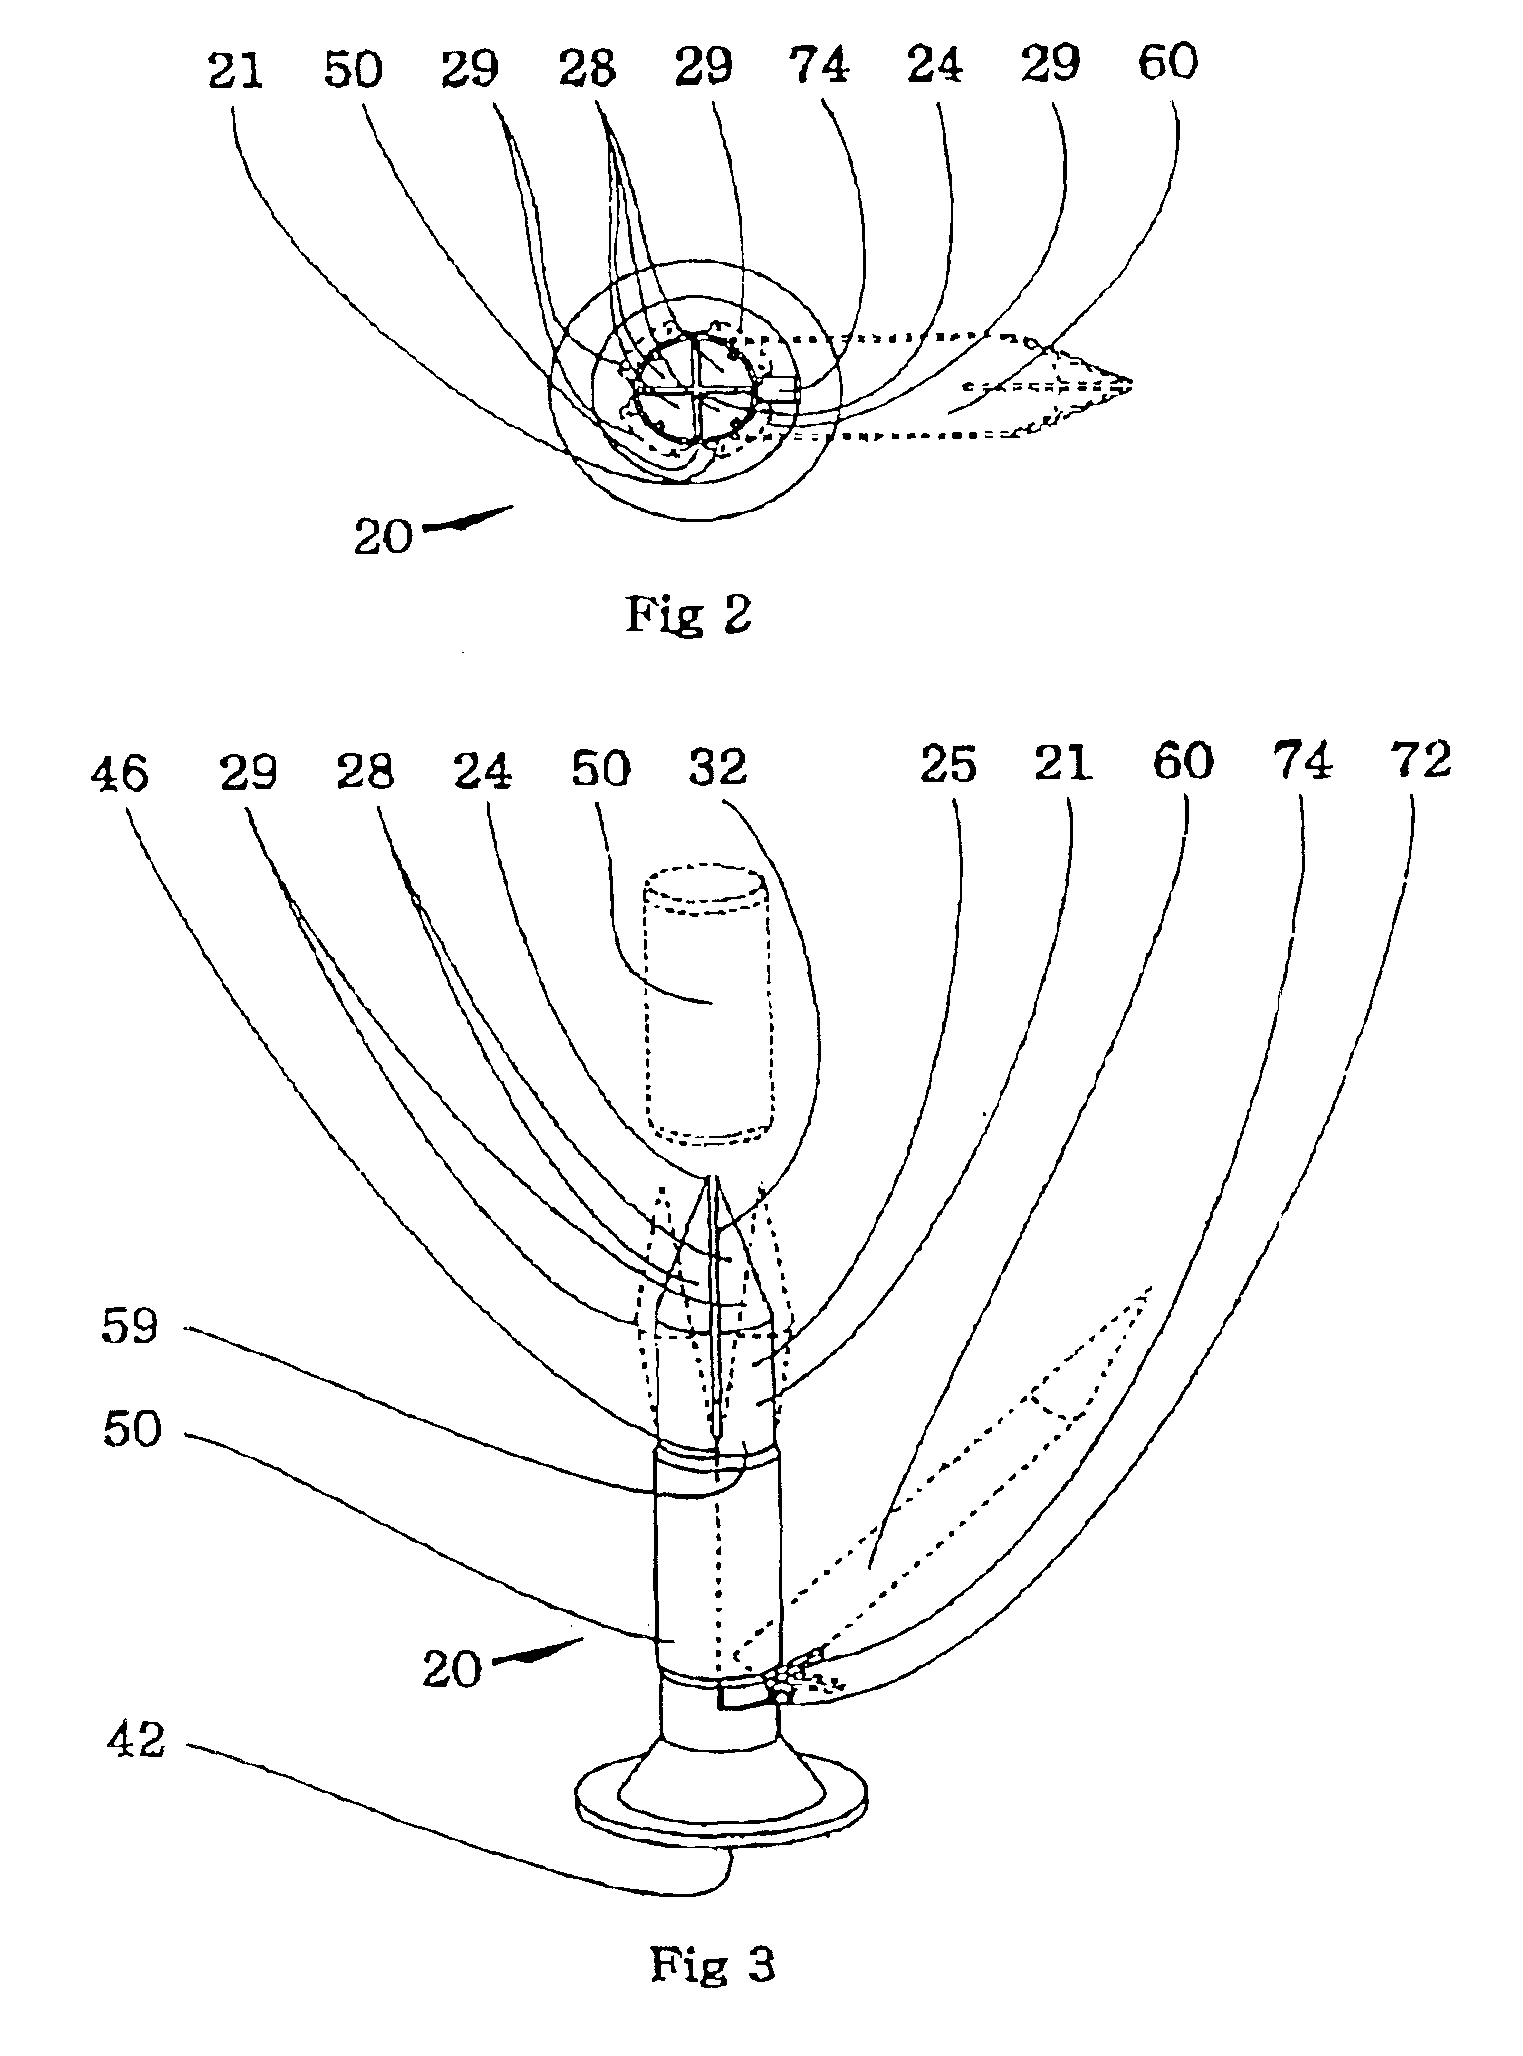 Food injection device